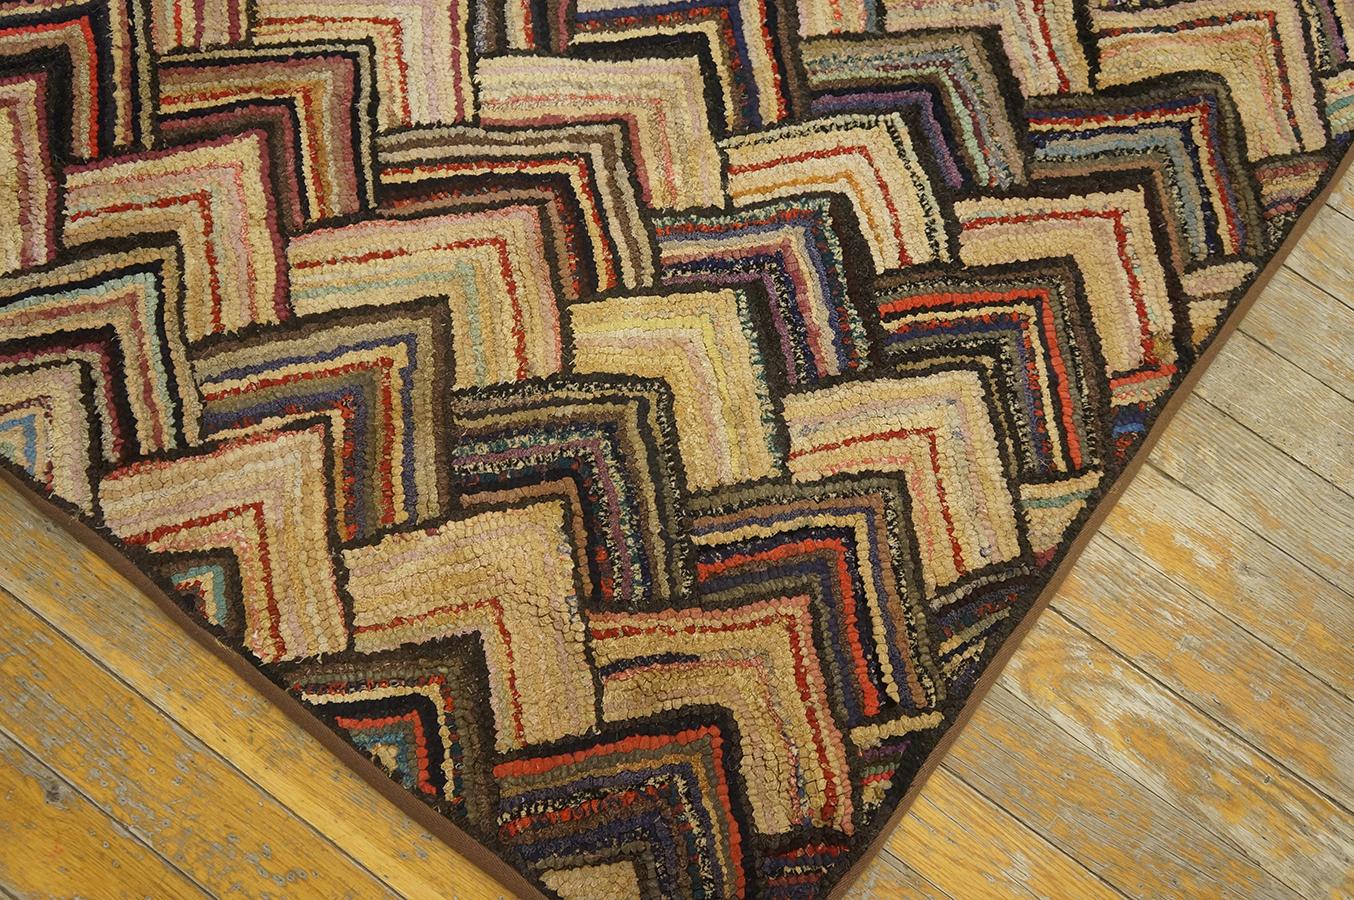 Wool Early 20th Century American Hooked Rug ( 2' 7'' x 4' 6'' - 78 x 137 cm ) For Sale